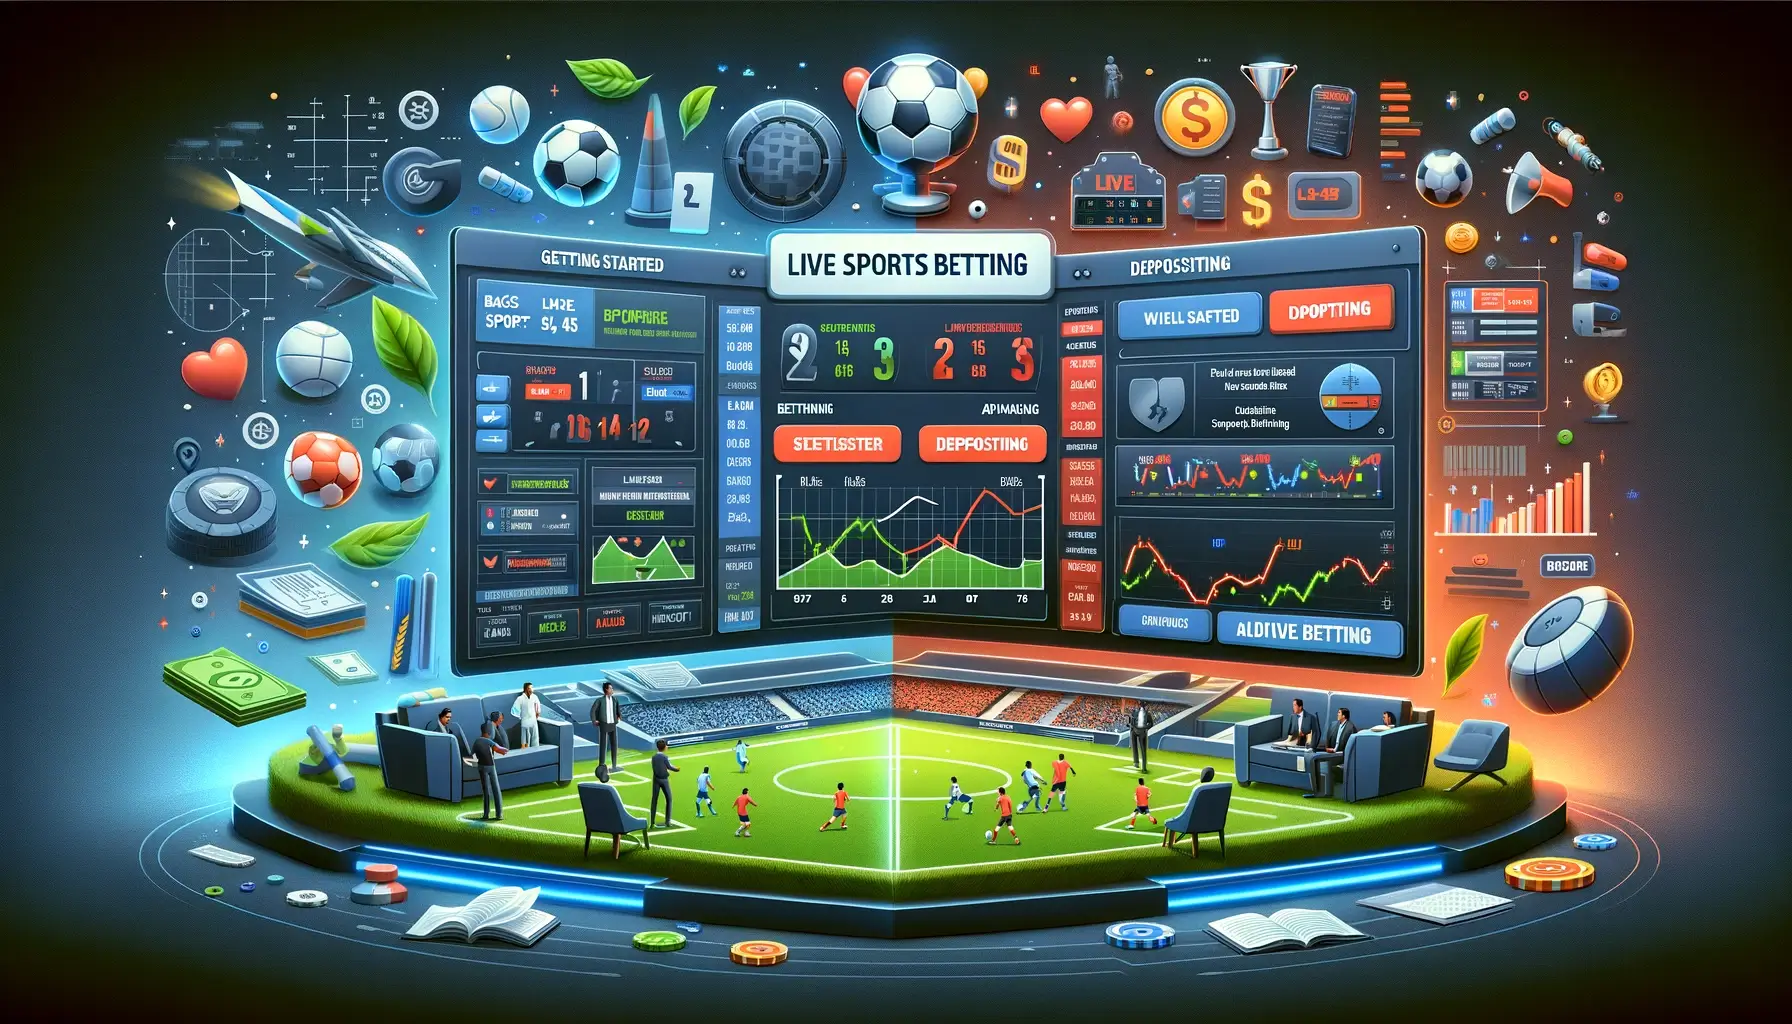 An engaging illustration of live sports betting, featuring a dynamic sports stadium with various events like soccer, basketball, and tennis. Fans in the stands are actively placing live bets on their mobile devices. A mobile phone screen displays a sports betting app with live betting options, fluctuating odds, and real-time data updates, capturing the excitement and energy of live sports betting.